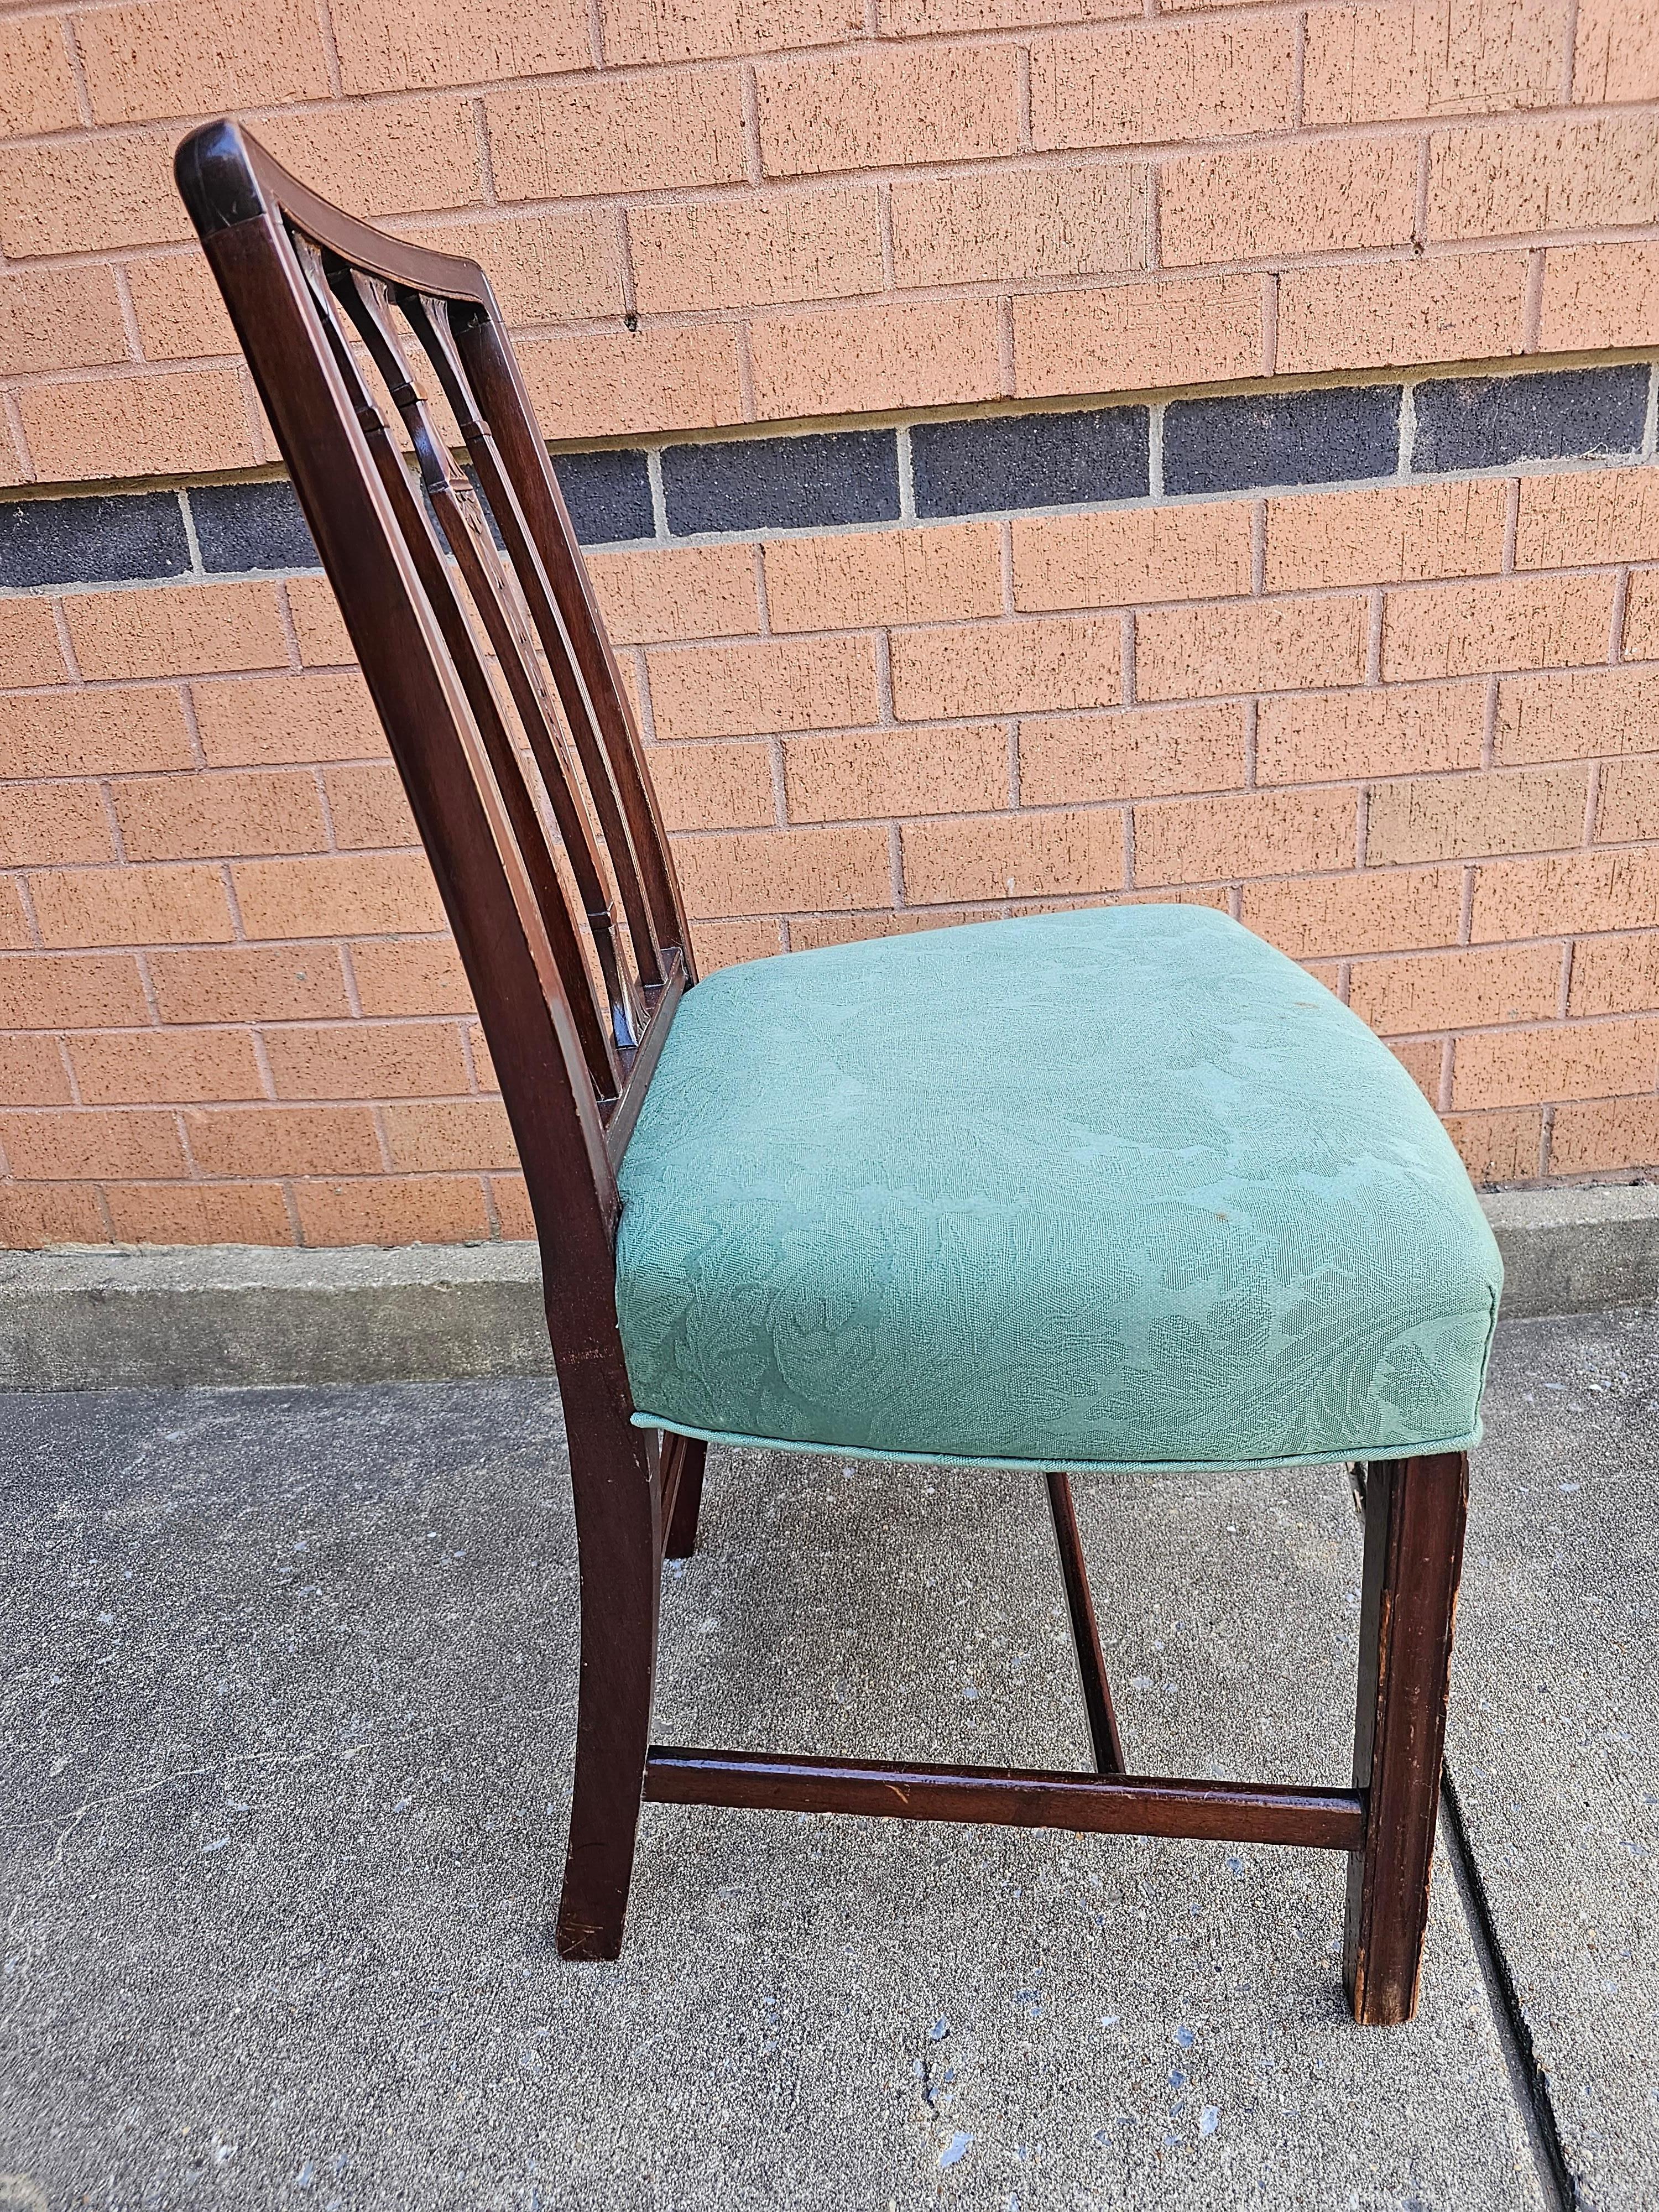 Edwardian Carved Mahogany and Upholstered Seat Side Chair and Foot Stool For Sale 1